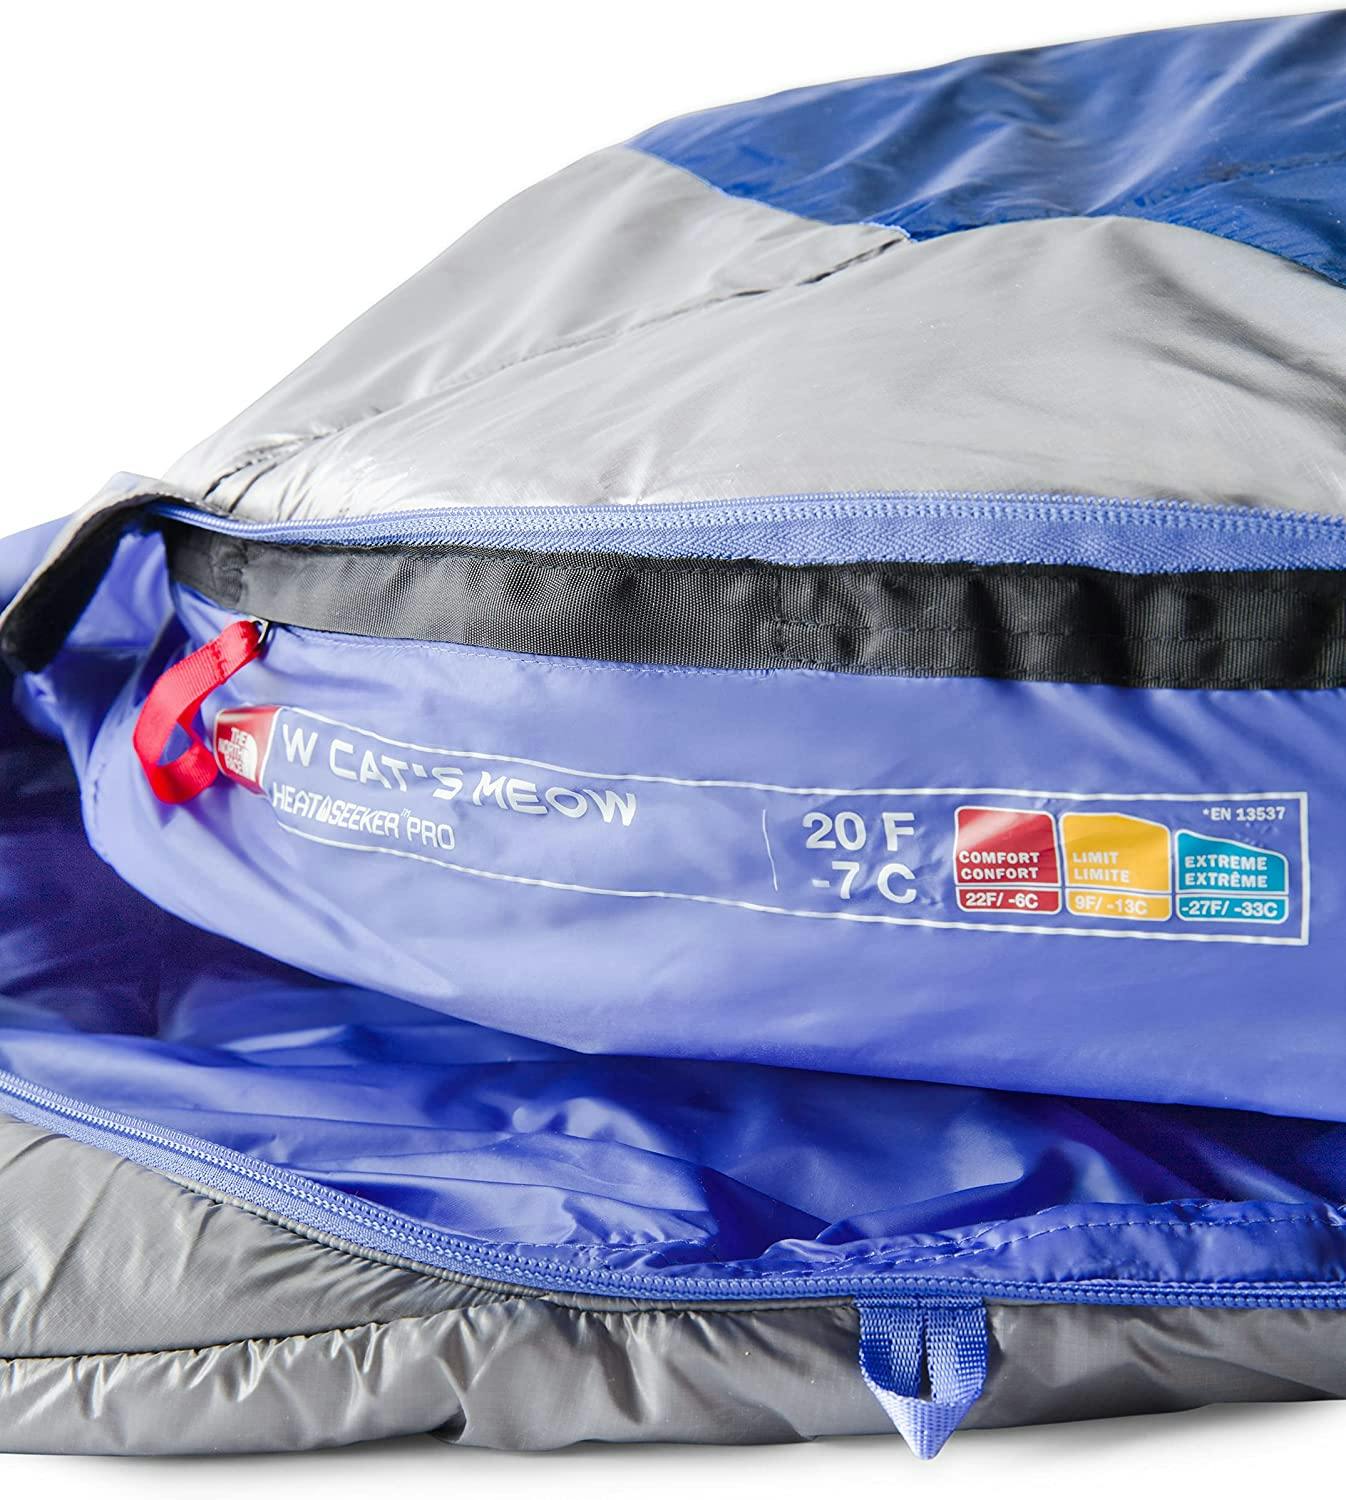 The North Face Cat's Meow Guide 20 Sleeping Bag - Women's